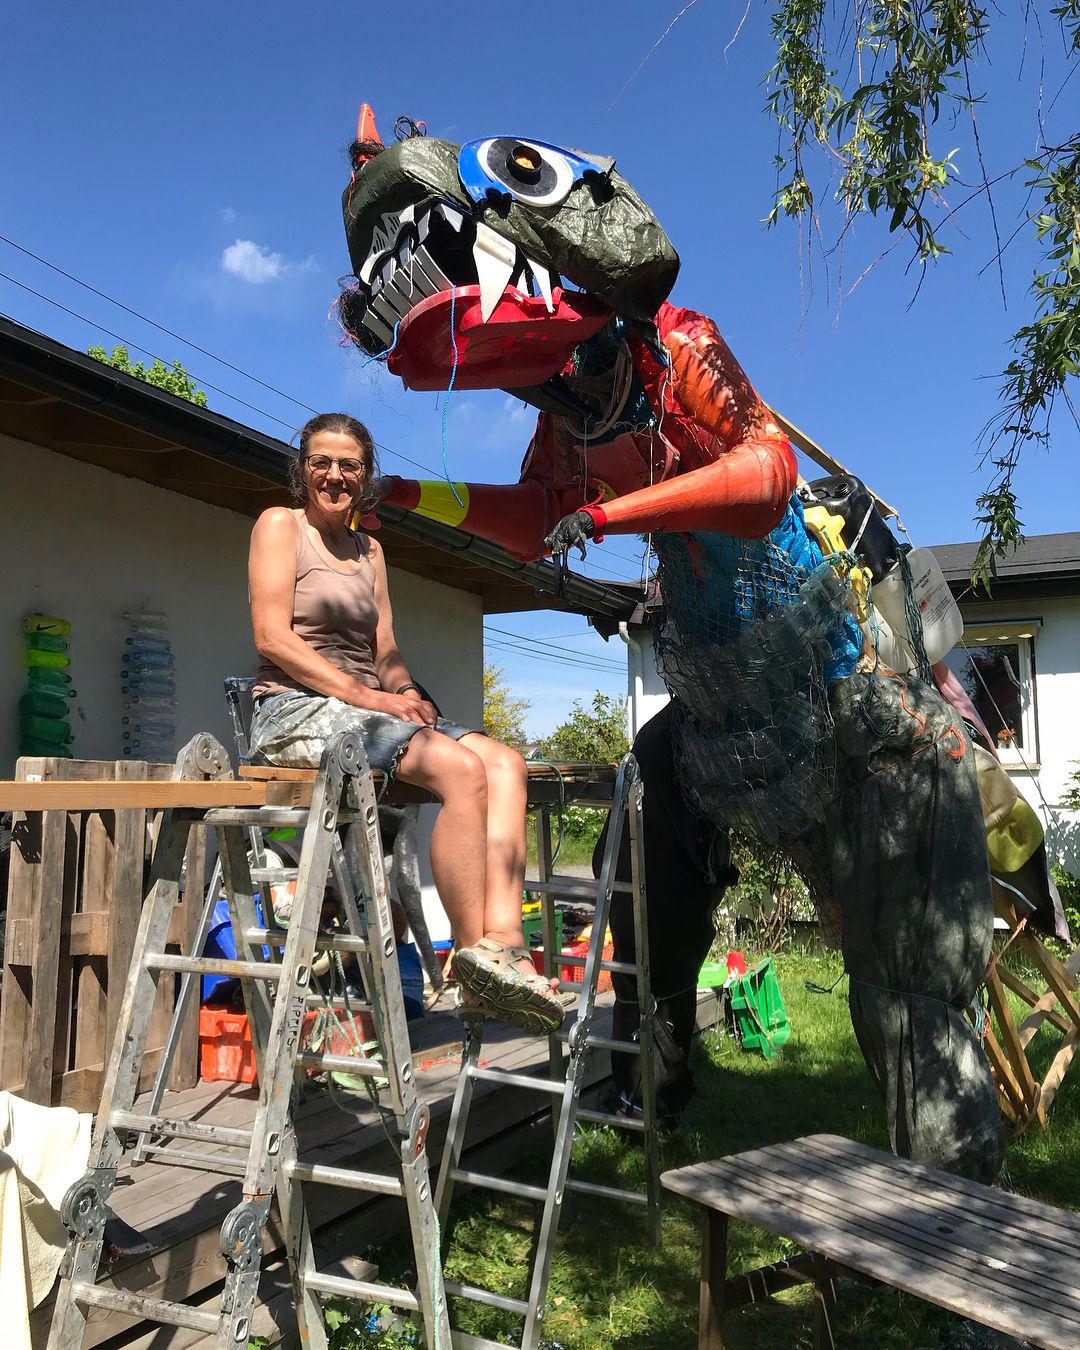 Artist Pippip Ferner working on her installation 'Plastozilla', a four meters tall dinosaur made entirely of plastic waste. Photo: Pippip Ferner